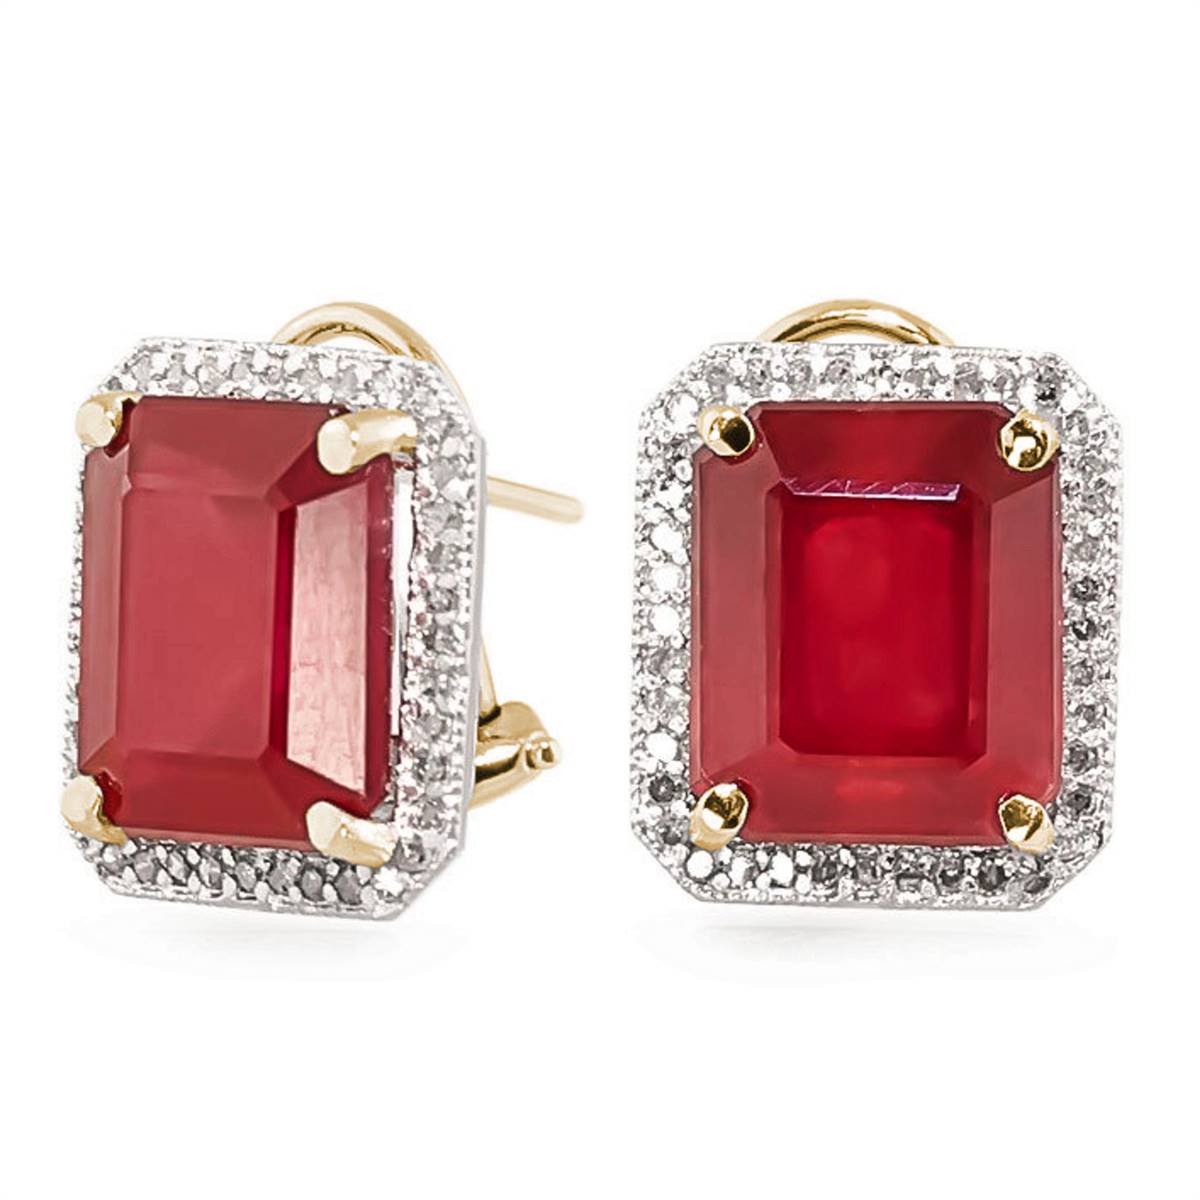 14.9 Carat 14K Solid Yellow Gold French Clips Earrings Diamond Ruby